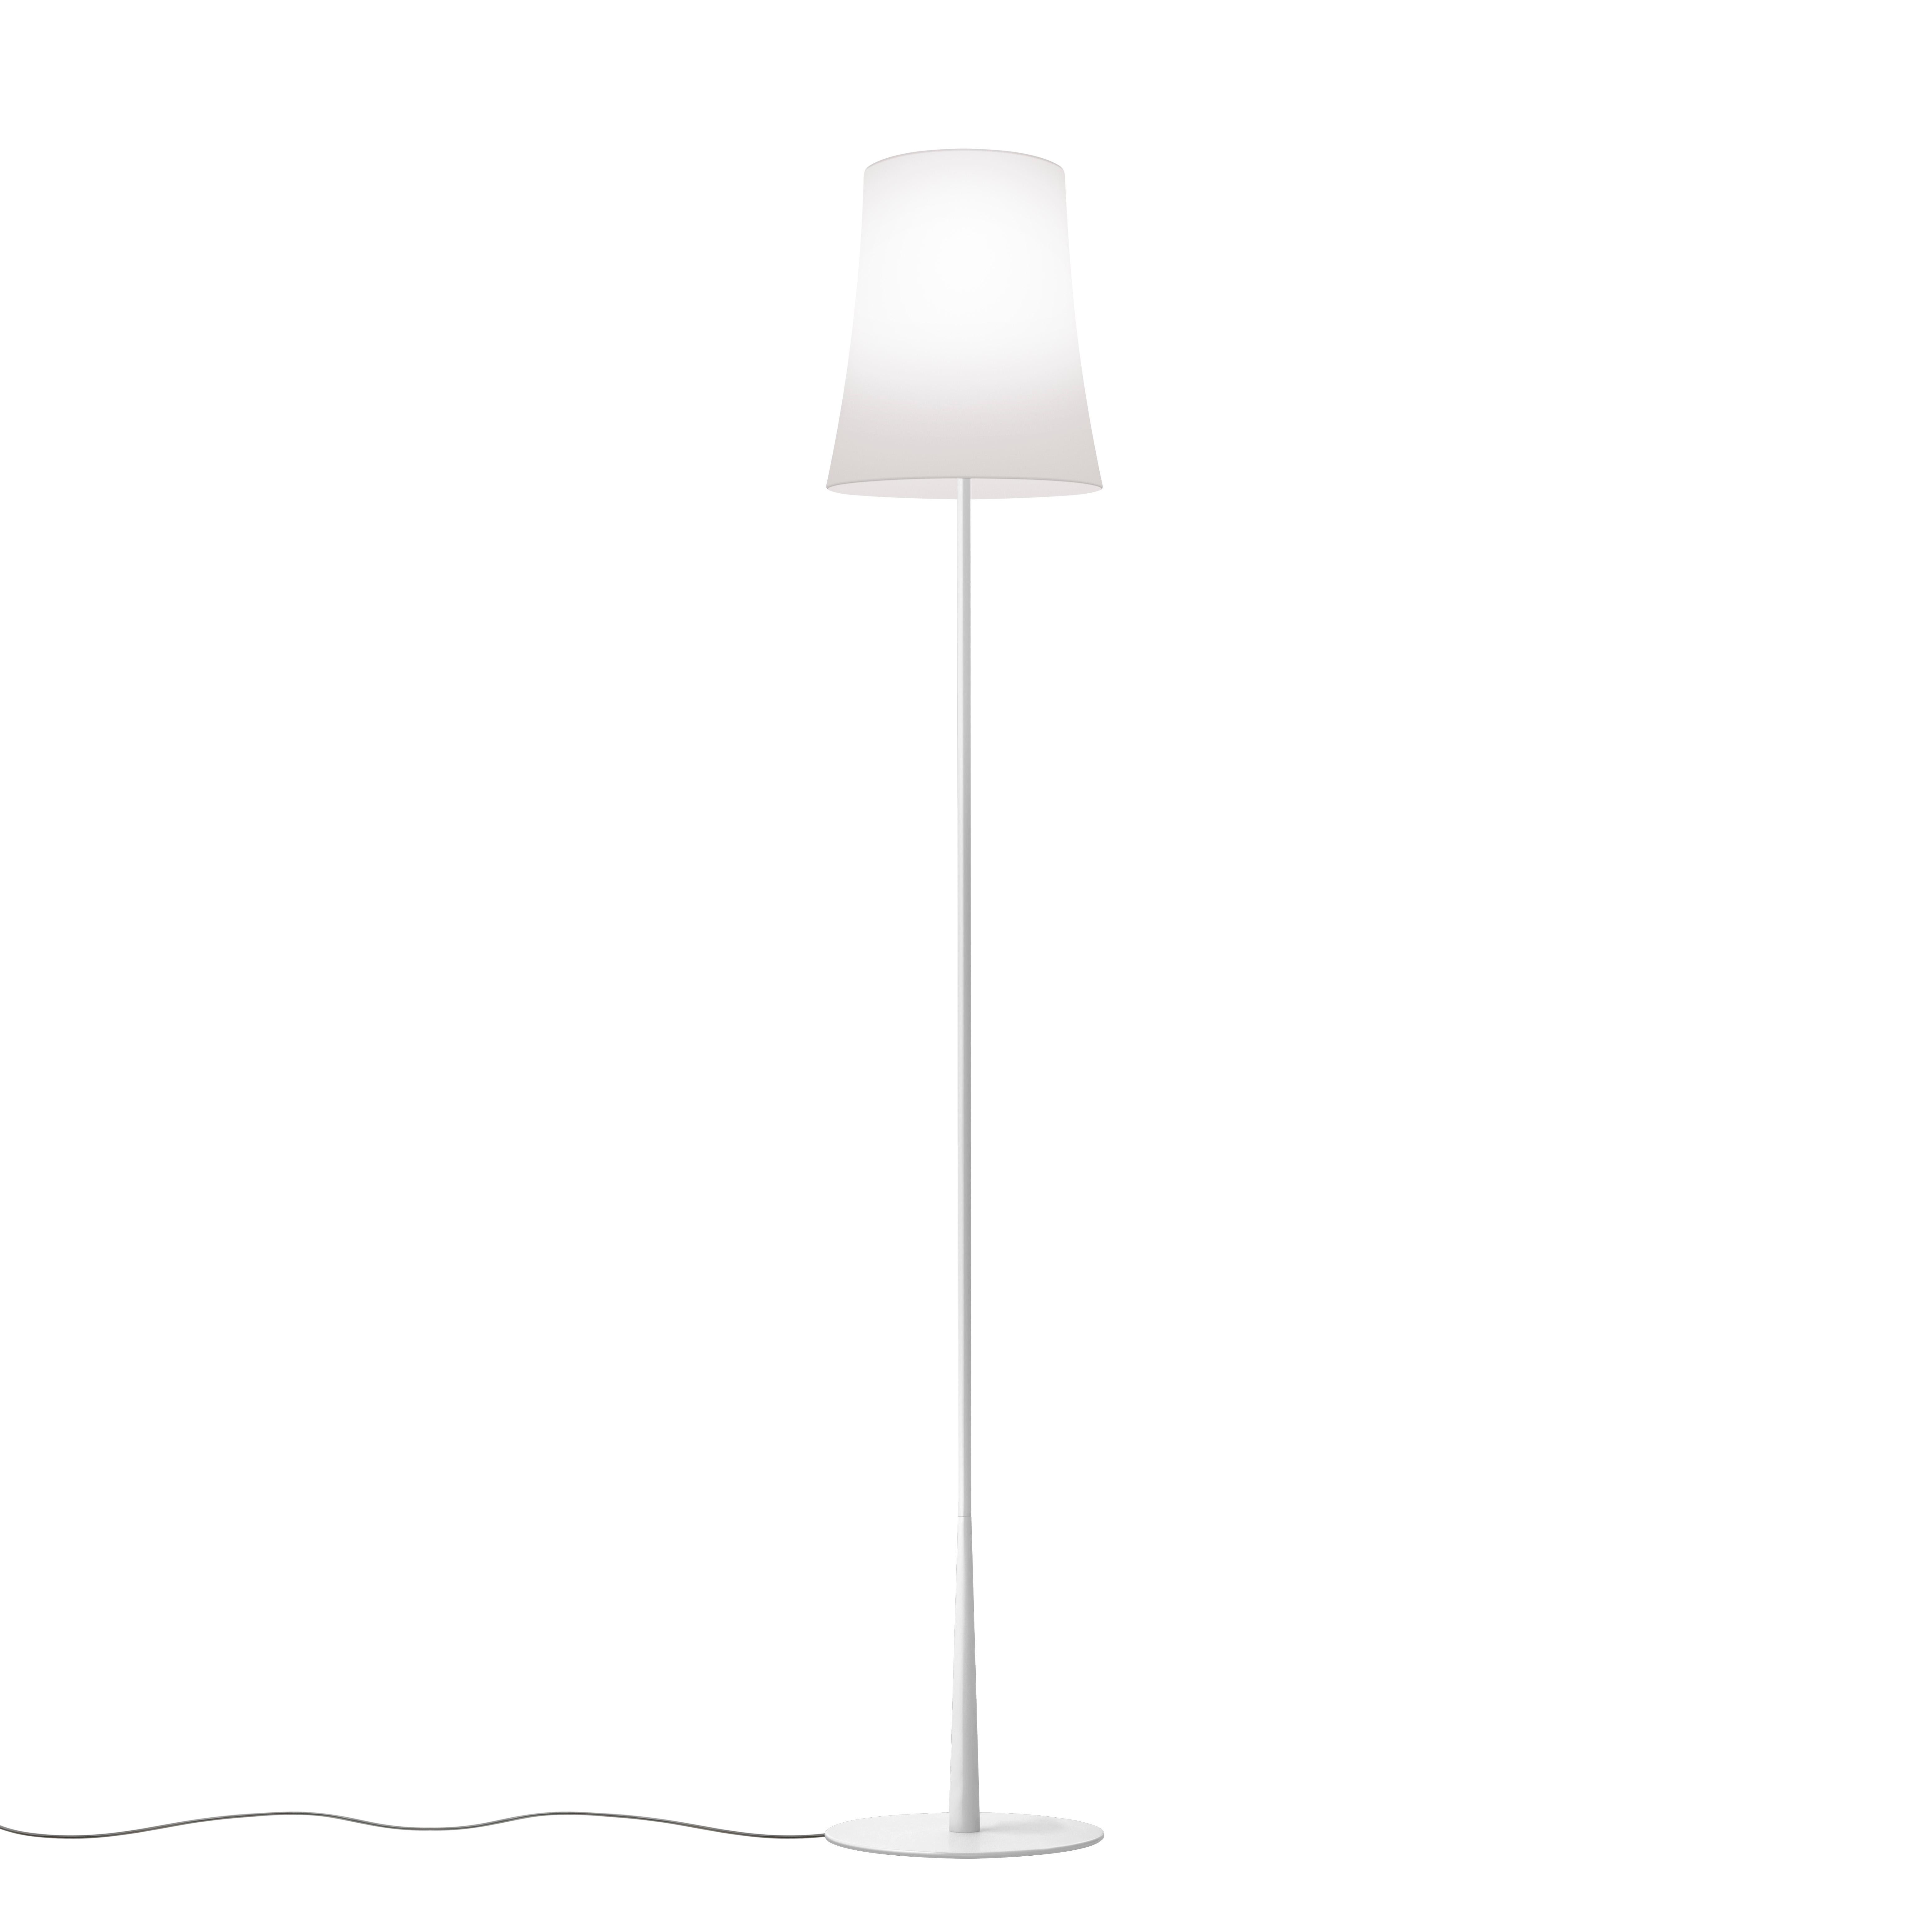 Floor and reading lamp with diffused light. Die cast zinc alloy base and steel rod, both liquid coated. Opaline polycarbonate internal diffuser, translucent polycarbonate external diffuser, both injection molded. The touch dimmer sensor is located